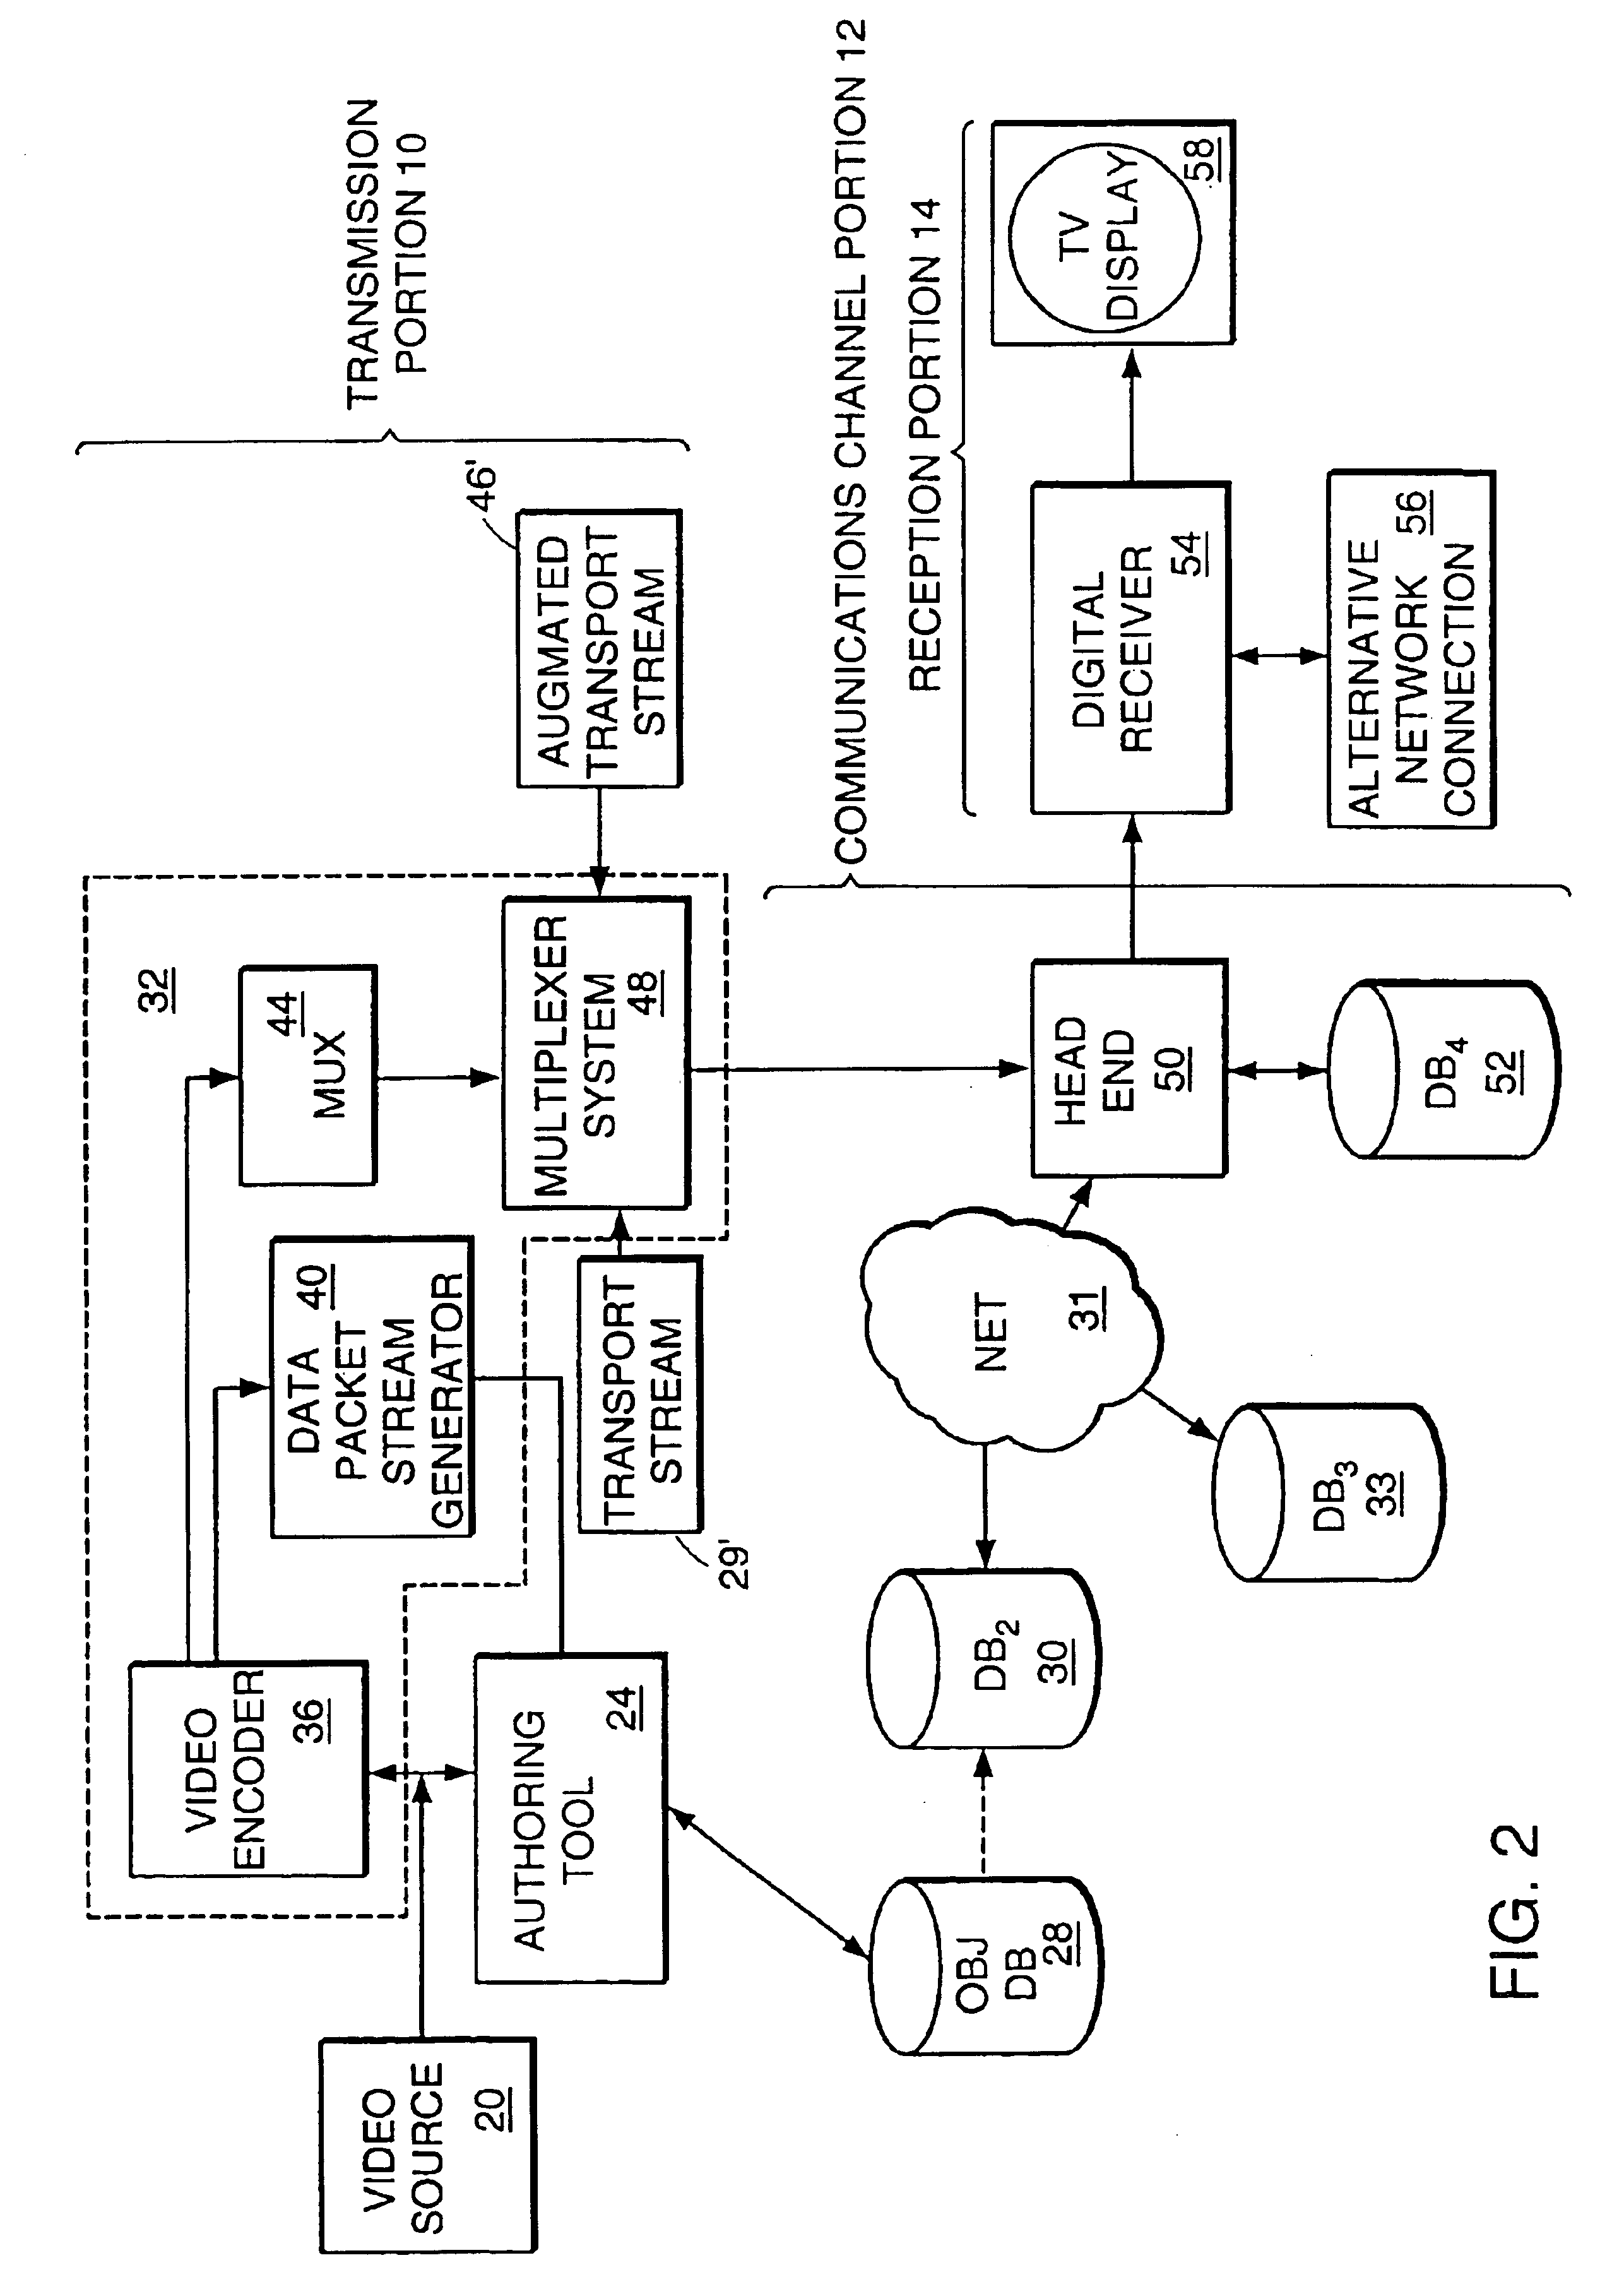 Methods for outlining and filling regions in multi-dimensional arrays